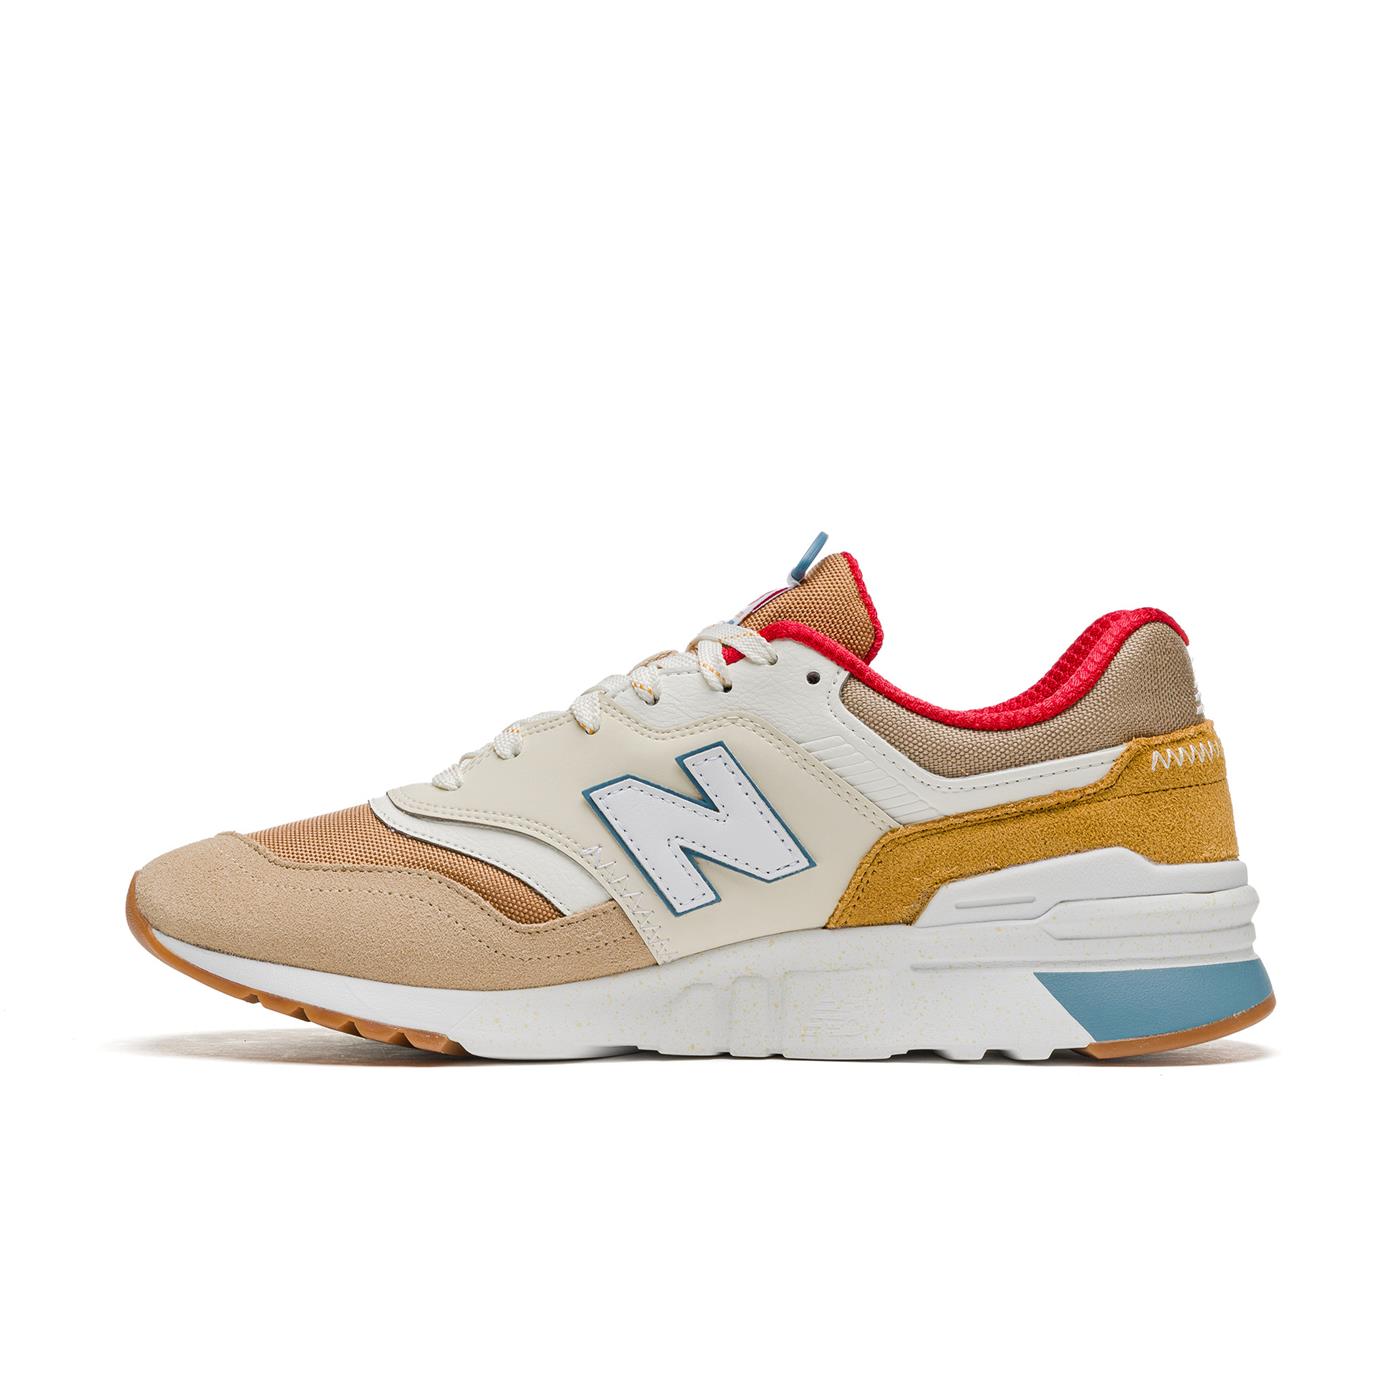 LIFESTYLE 997'S-MENS SNEAKERS-NEW BALANCE-JB Evans Fashions & Footwear